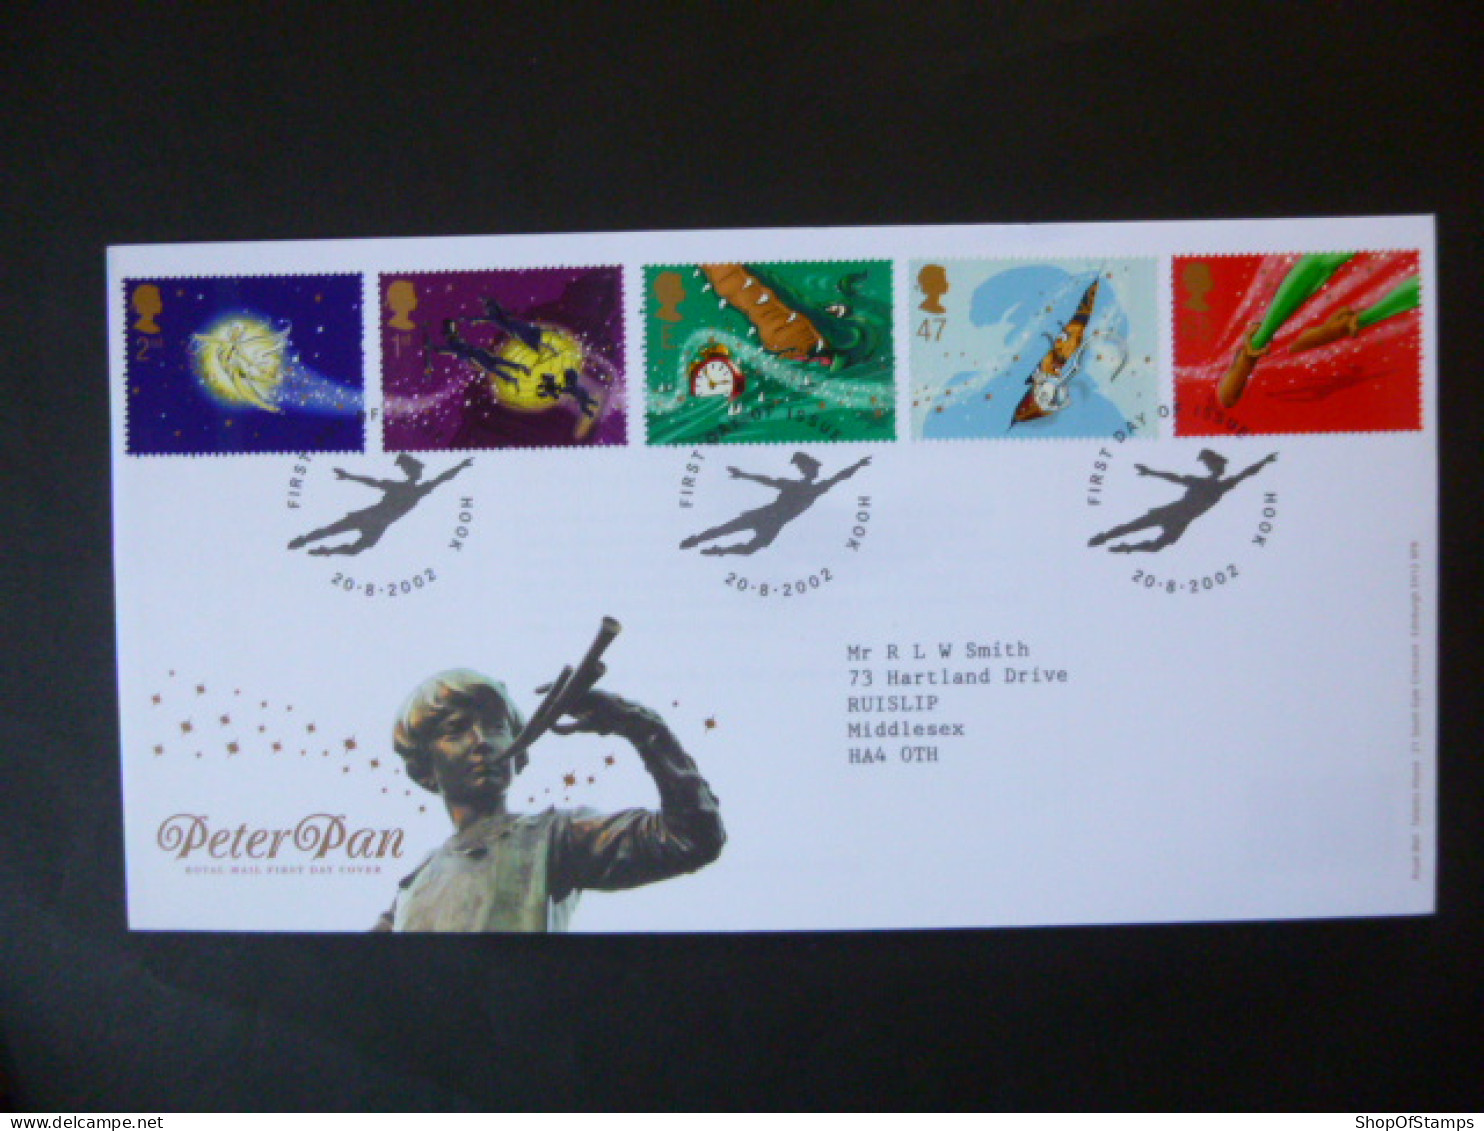 GREAT BRITAIN SG 2304 GREAT ORMOND STREET CHILDREN HOSPITAL 150YR FDC HOOK - Unclassified